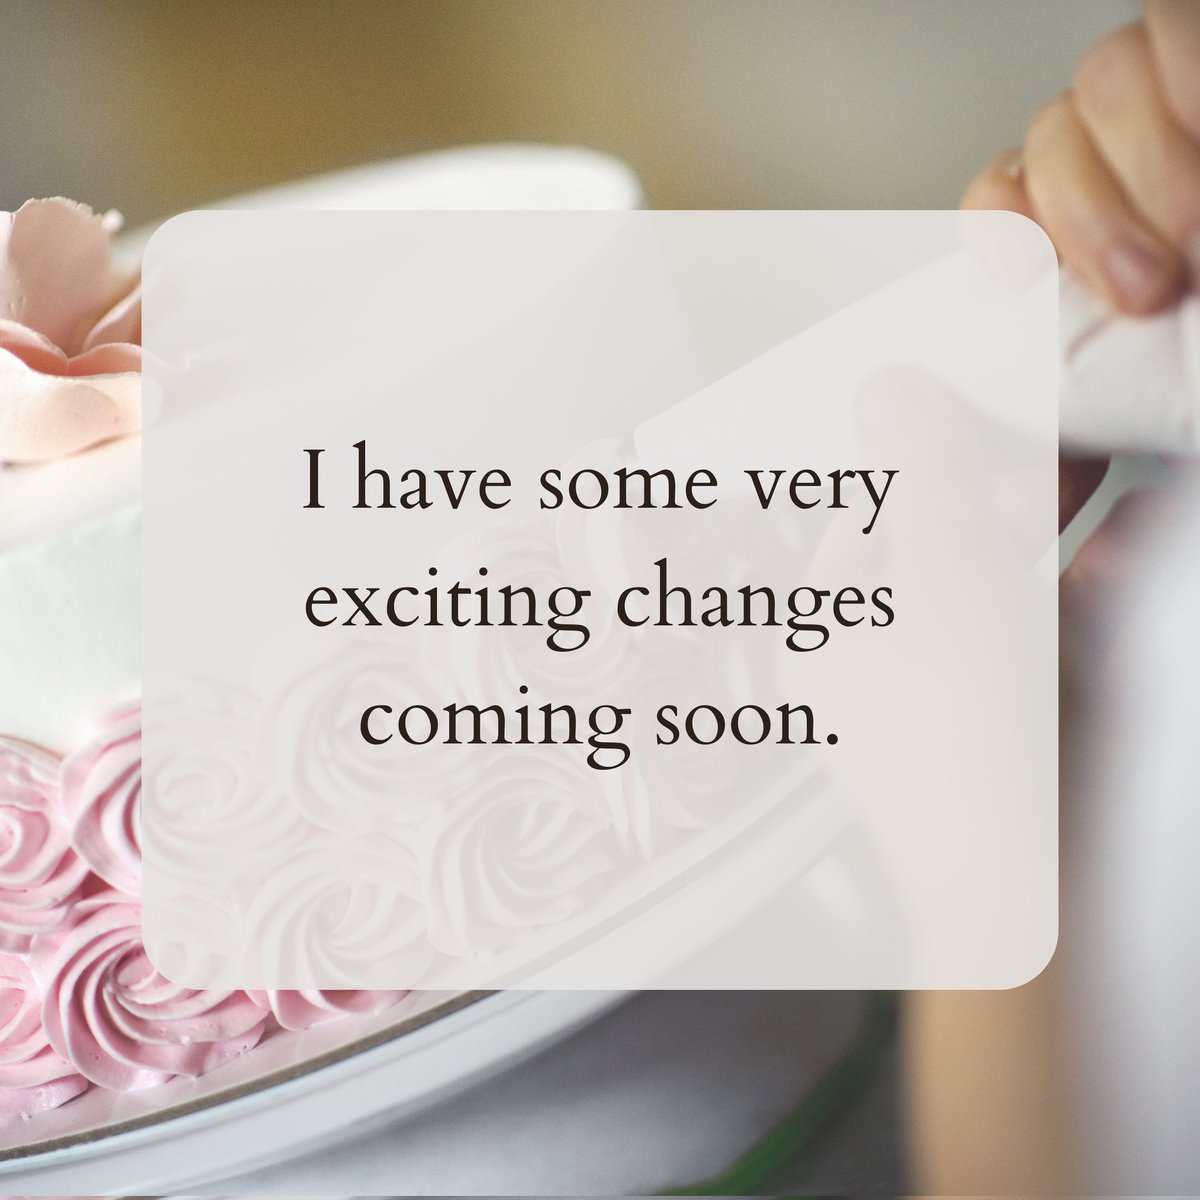 📣✨️ EXCITING NEWS COMING SOON ✨️📣

I am so excited to tell you that I have some new and exciting changes coming to my business, and I can not wait to share with you all very soon!!

So stay tuned, details coming soon 

#business #businessupgrade #newchanges